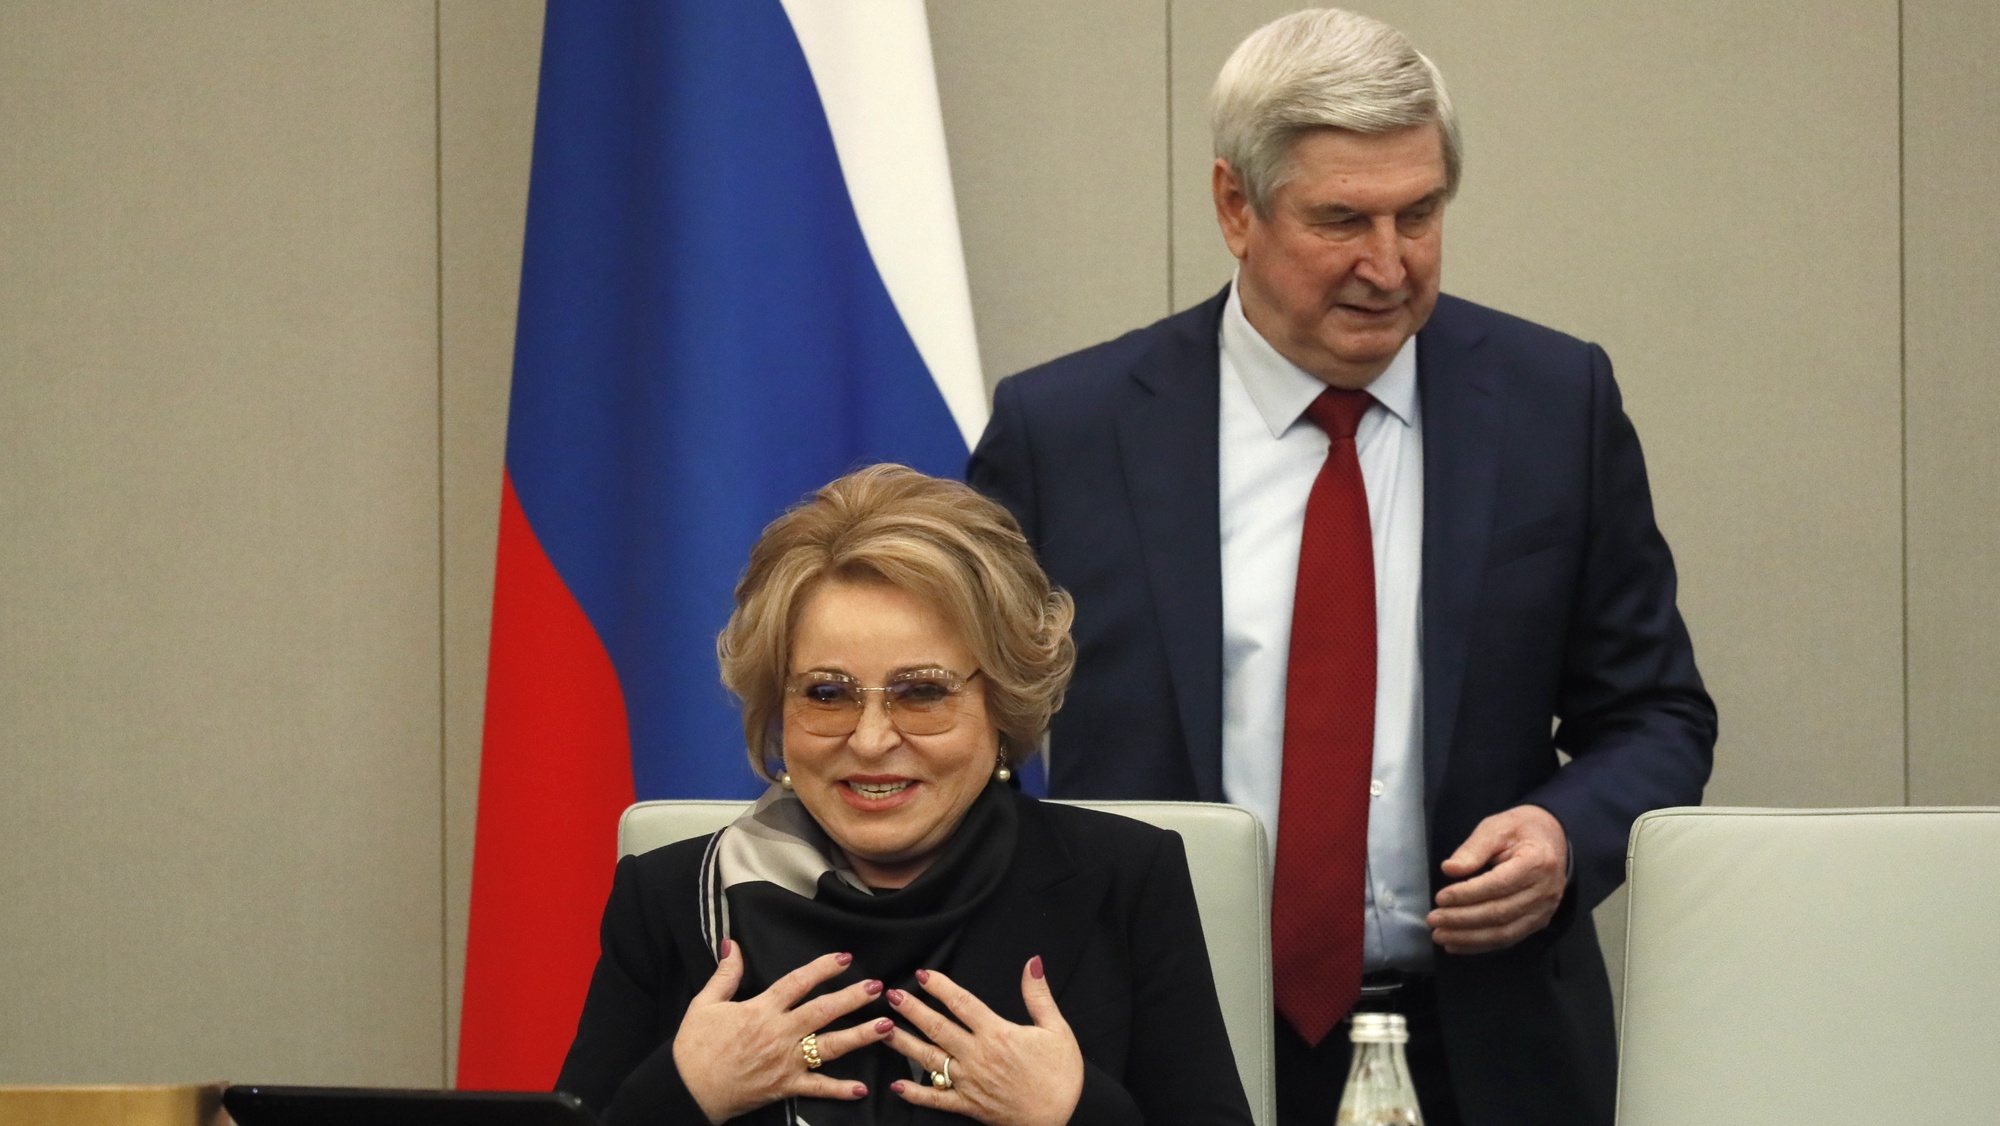 epa09193082 Chairwoman of the Russian Federation Council (upper house of parliament) Valentina Matviyenko (C) and Deputy Speaker of the State Duma of the Russian Federation Ivan Melnikov (R) attend a plenary session of the Russian State Duma (lower house of parliament) in Moscow, Russia 12 May 2021.  EPA/YURI KOCHETKOV